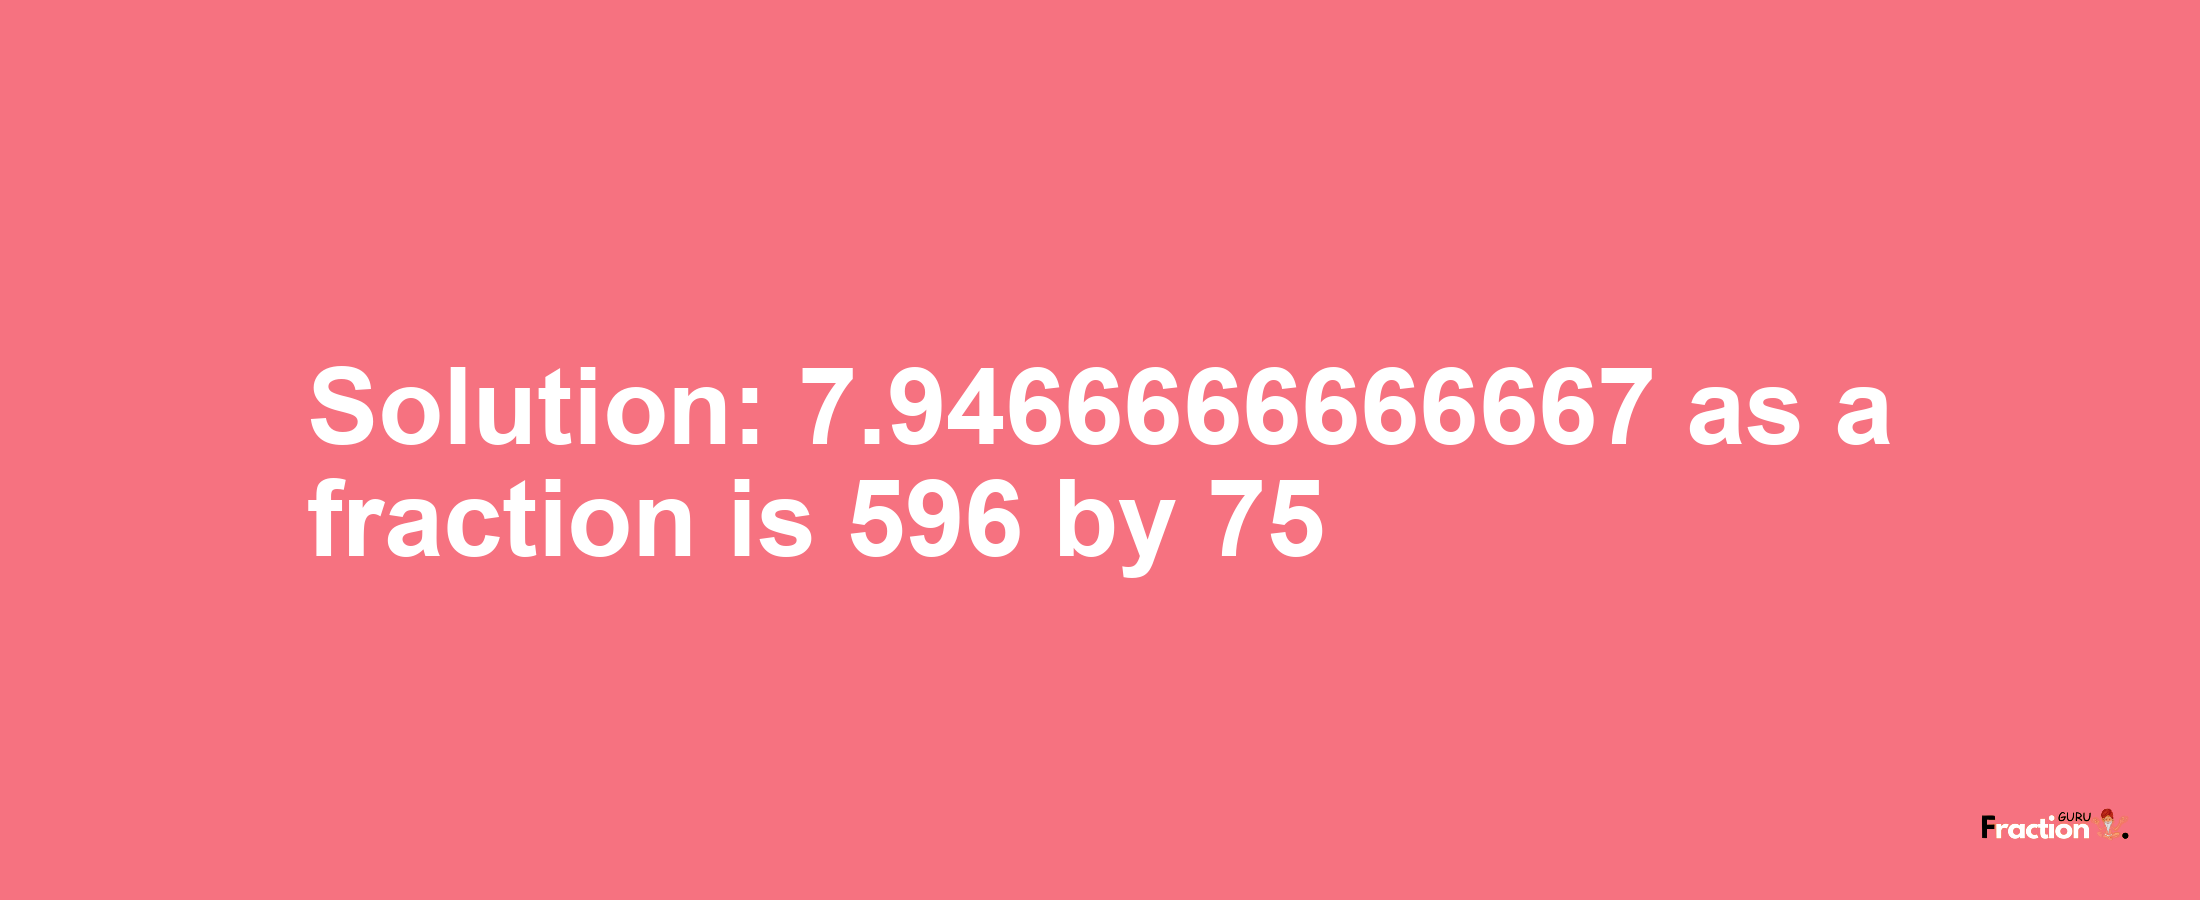 Solution:7.9466666666667 as a fraction is 596/75